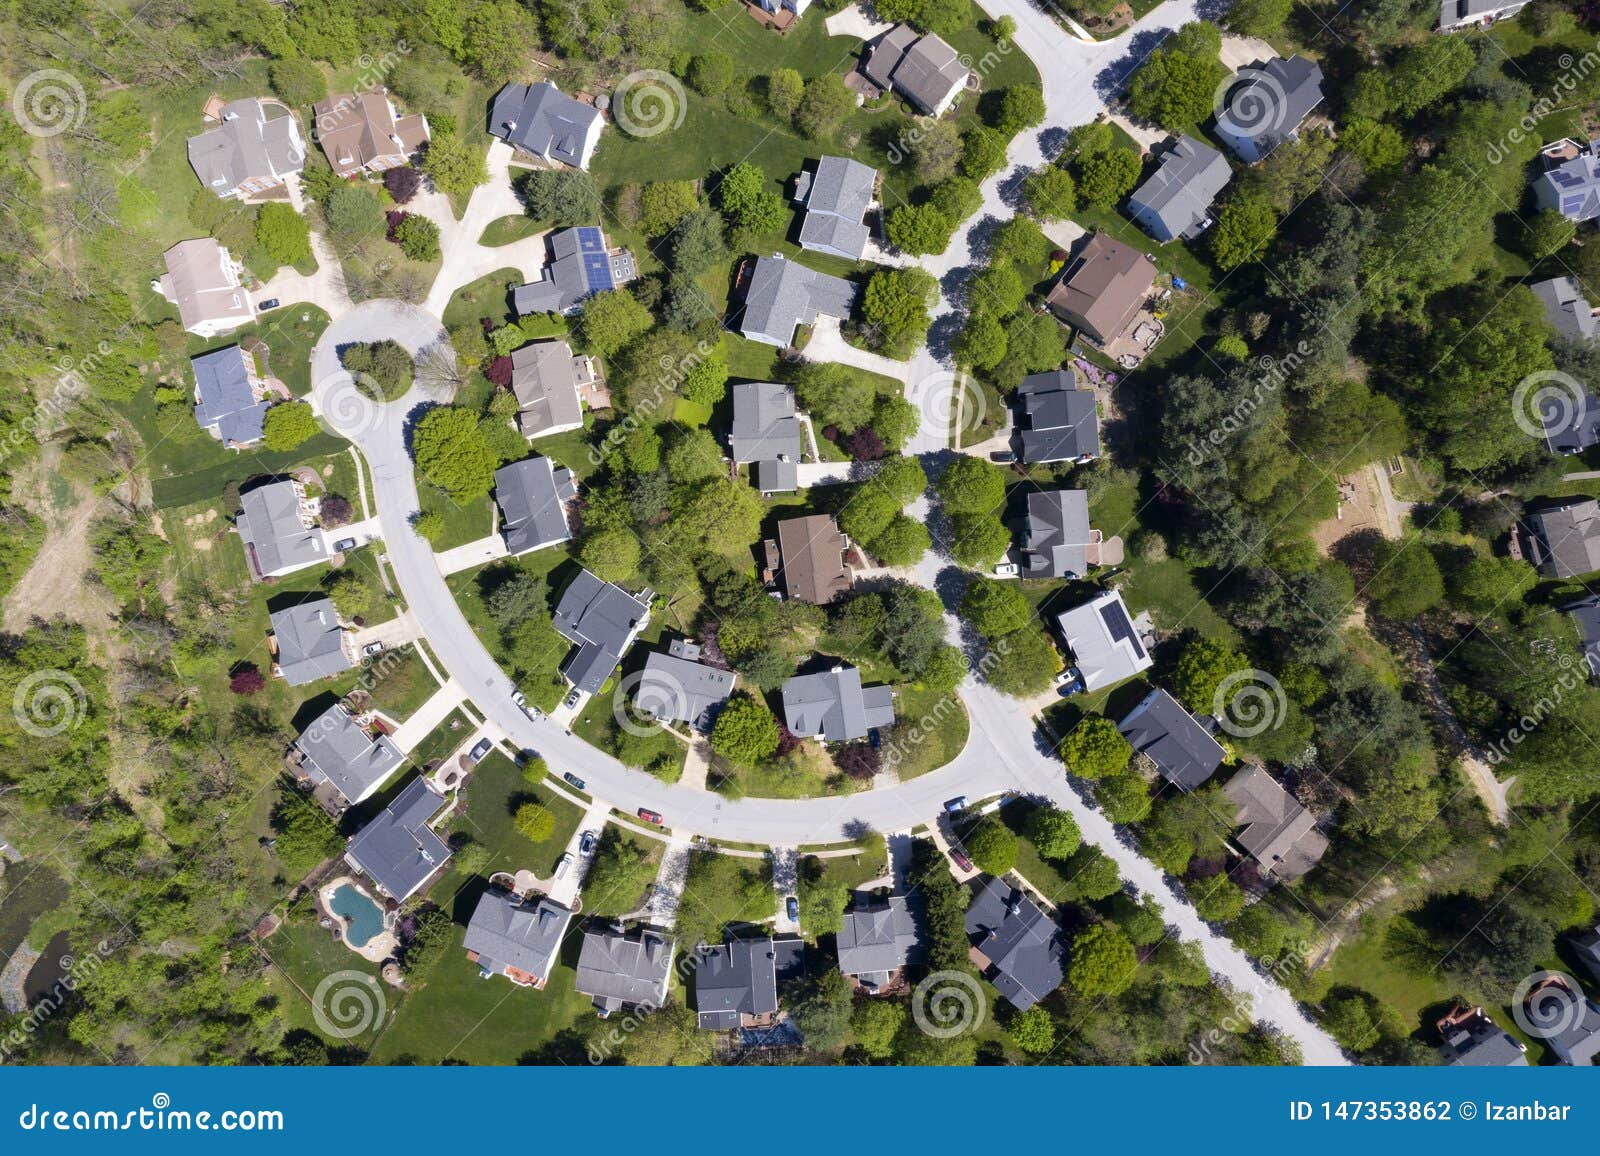 Upper Middle Class American Neighborhood with Curving Street in